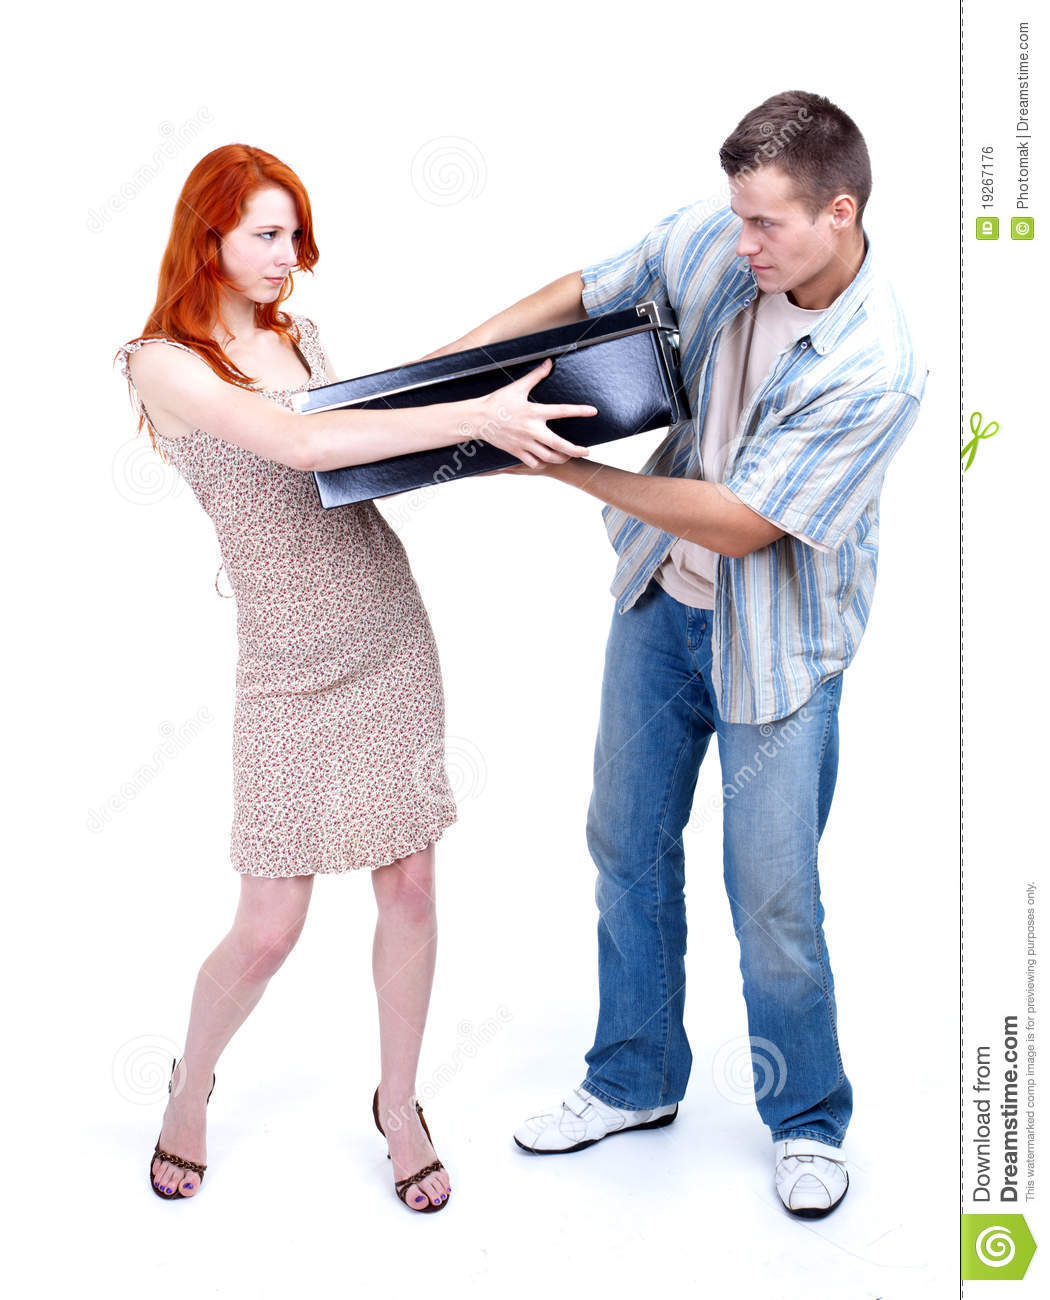 Divorce Couple Fighting About Big Black Box Royalty Free Stock Image